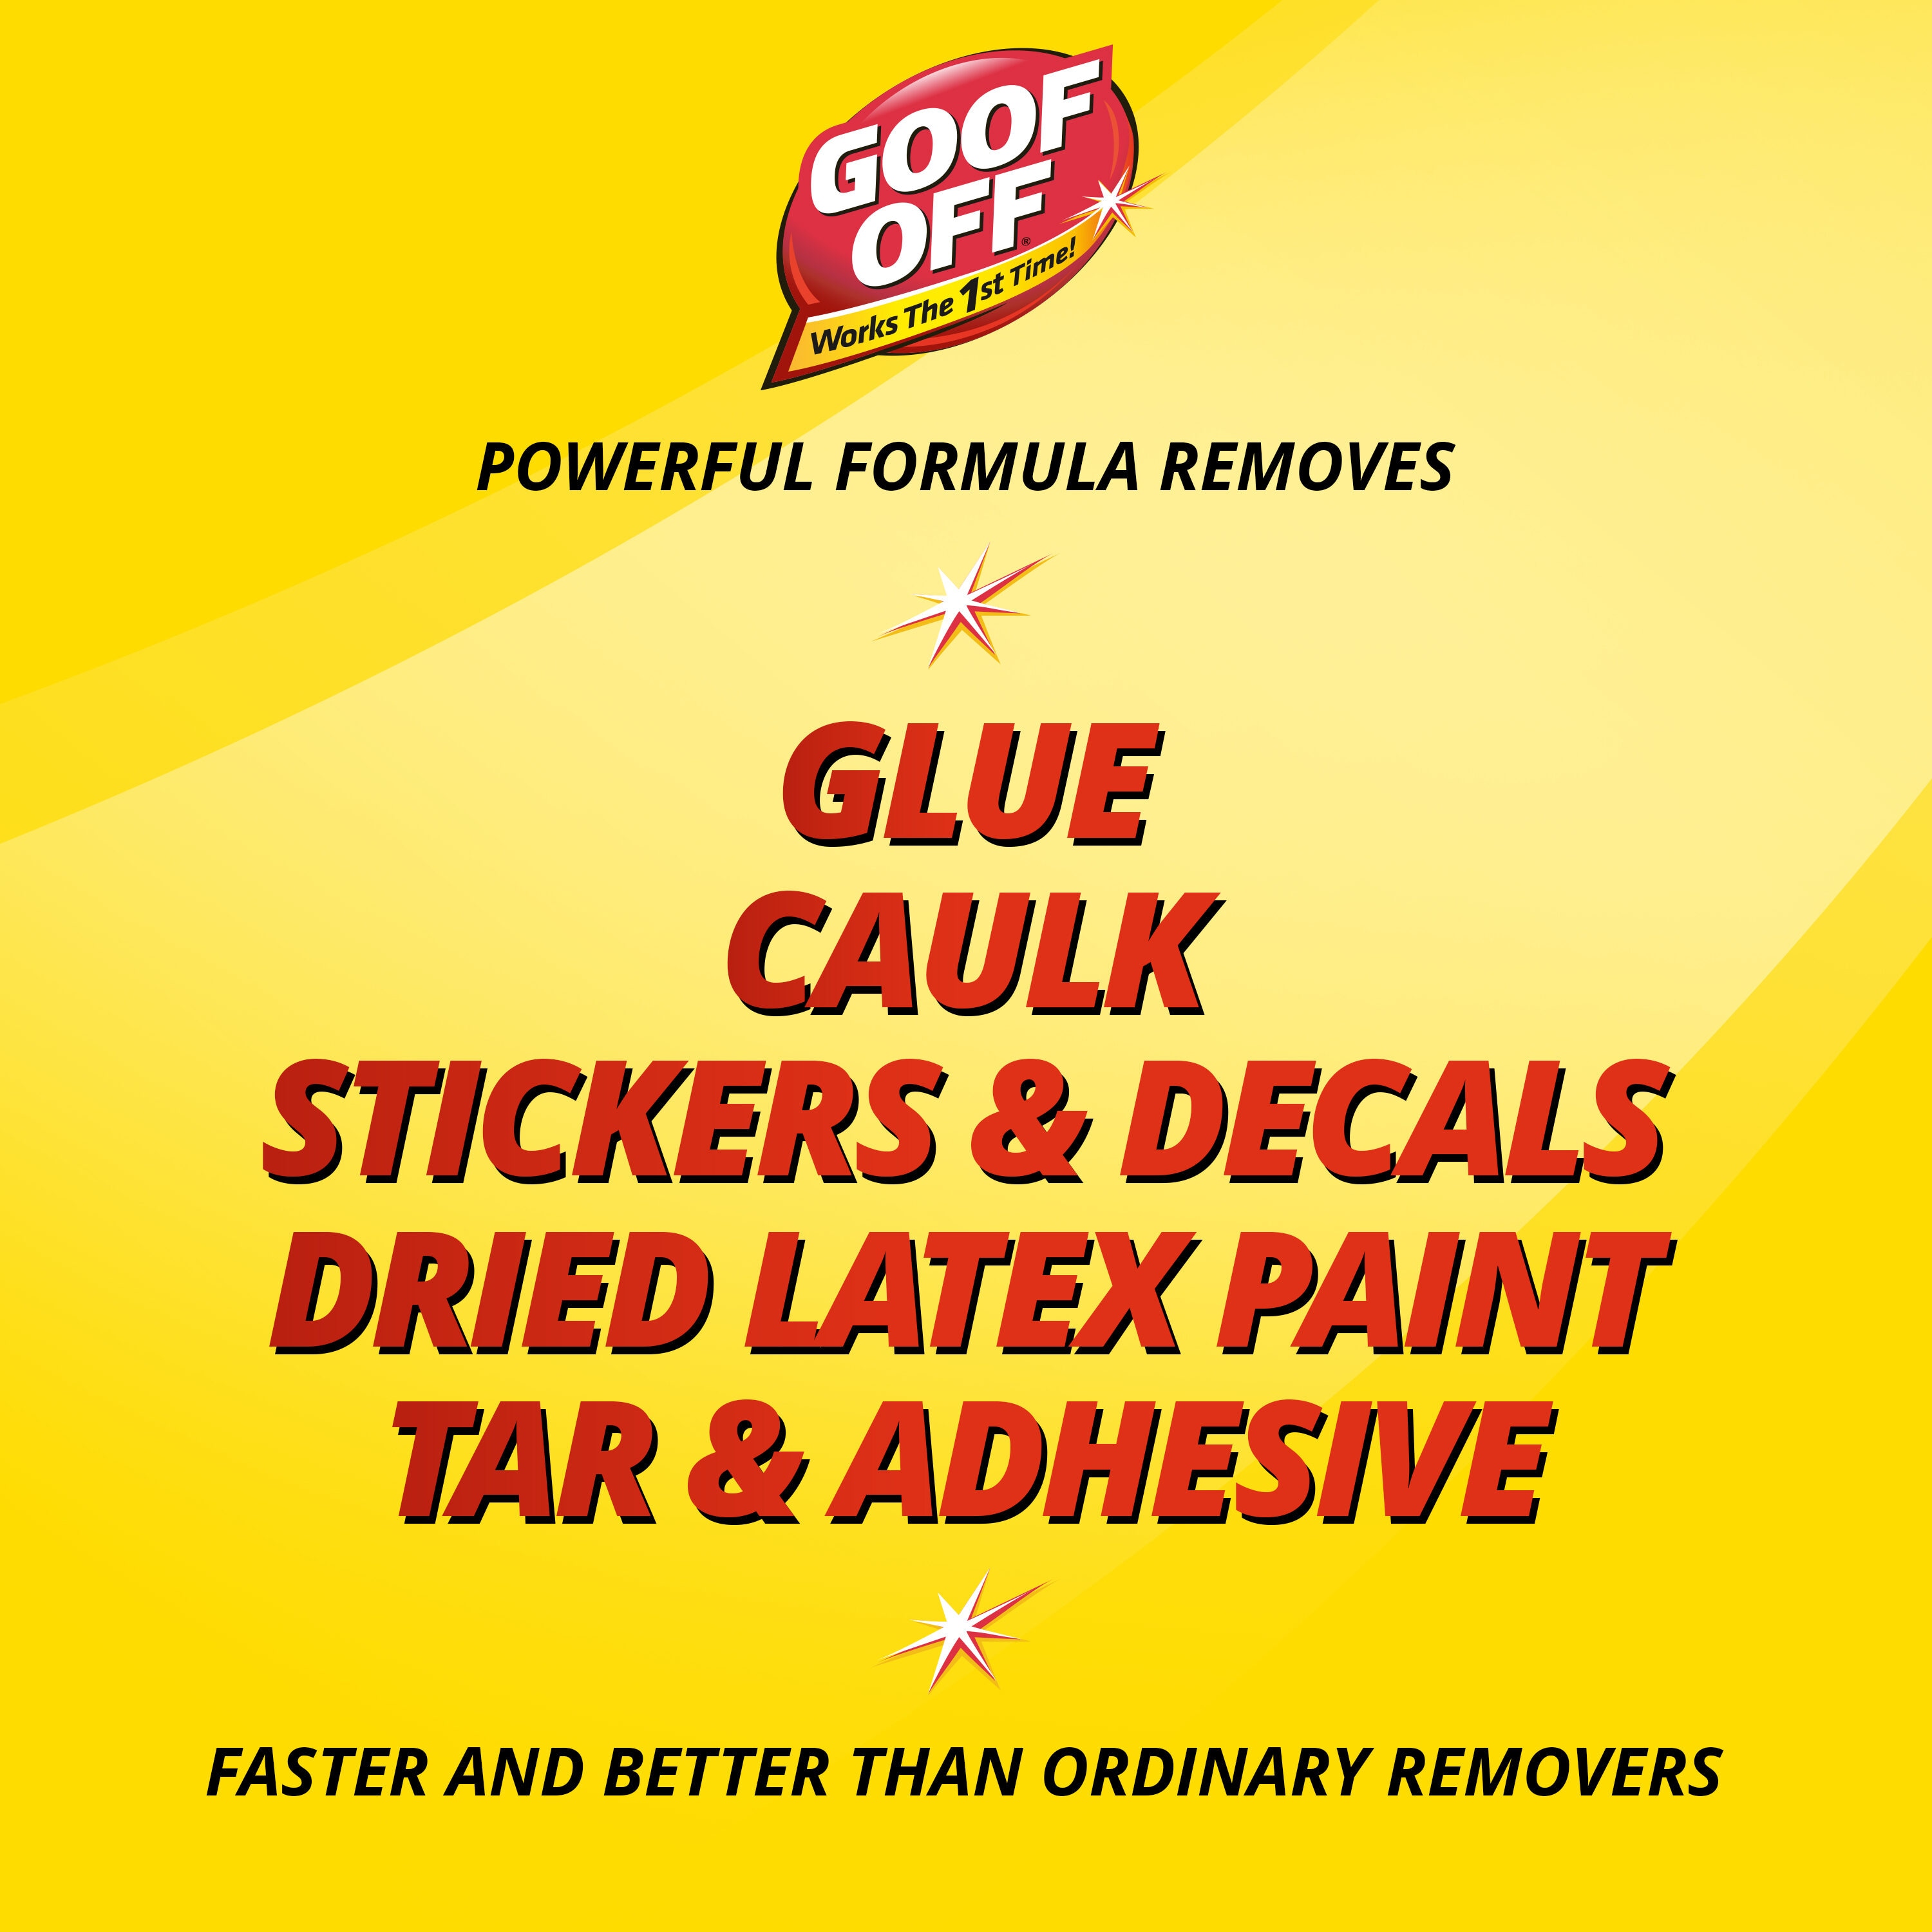 Best Glue for Stickers. What Adhesive Is Suitable for Application?